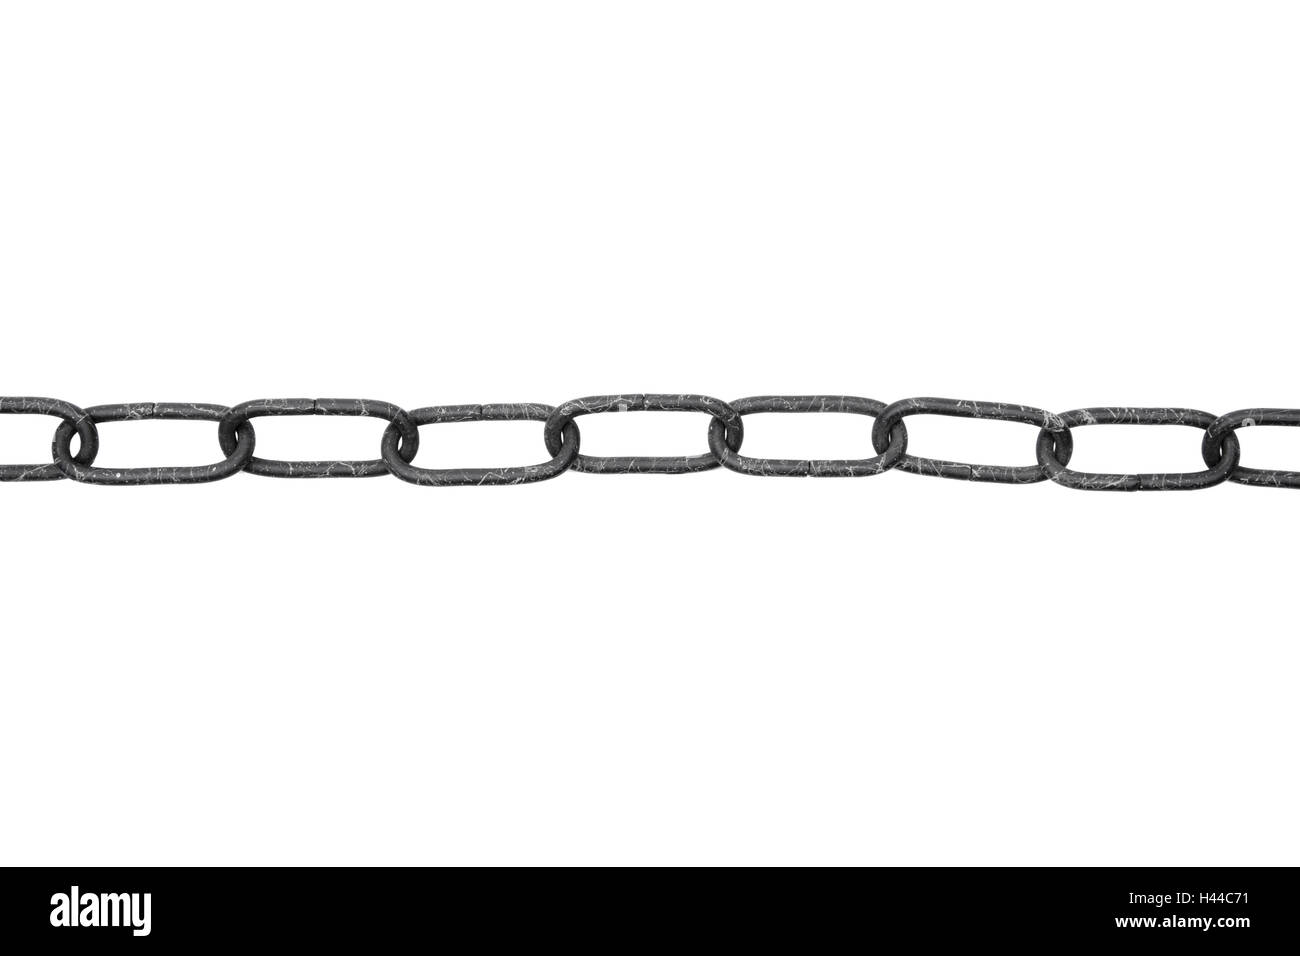 Iron chain, cut-out, Stock Photo